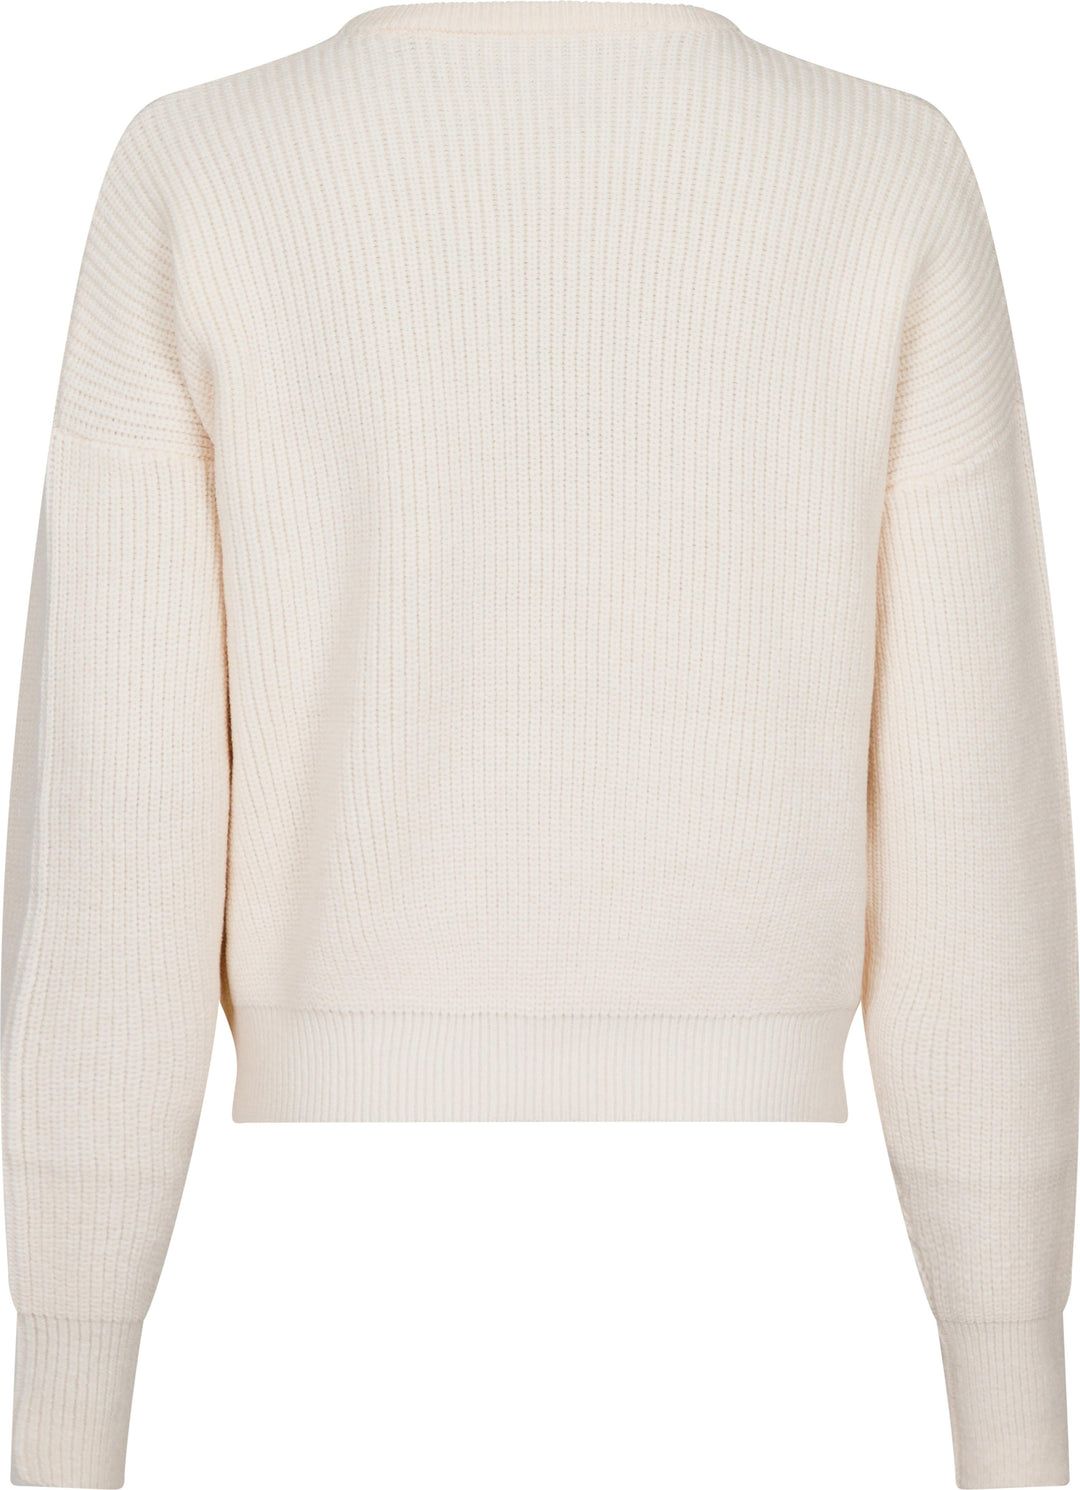 Neo Noir - Moana Solid Knit Blouse - Off White